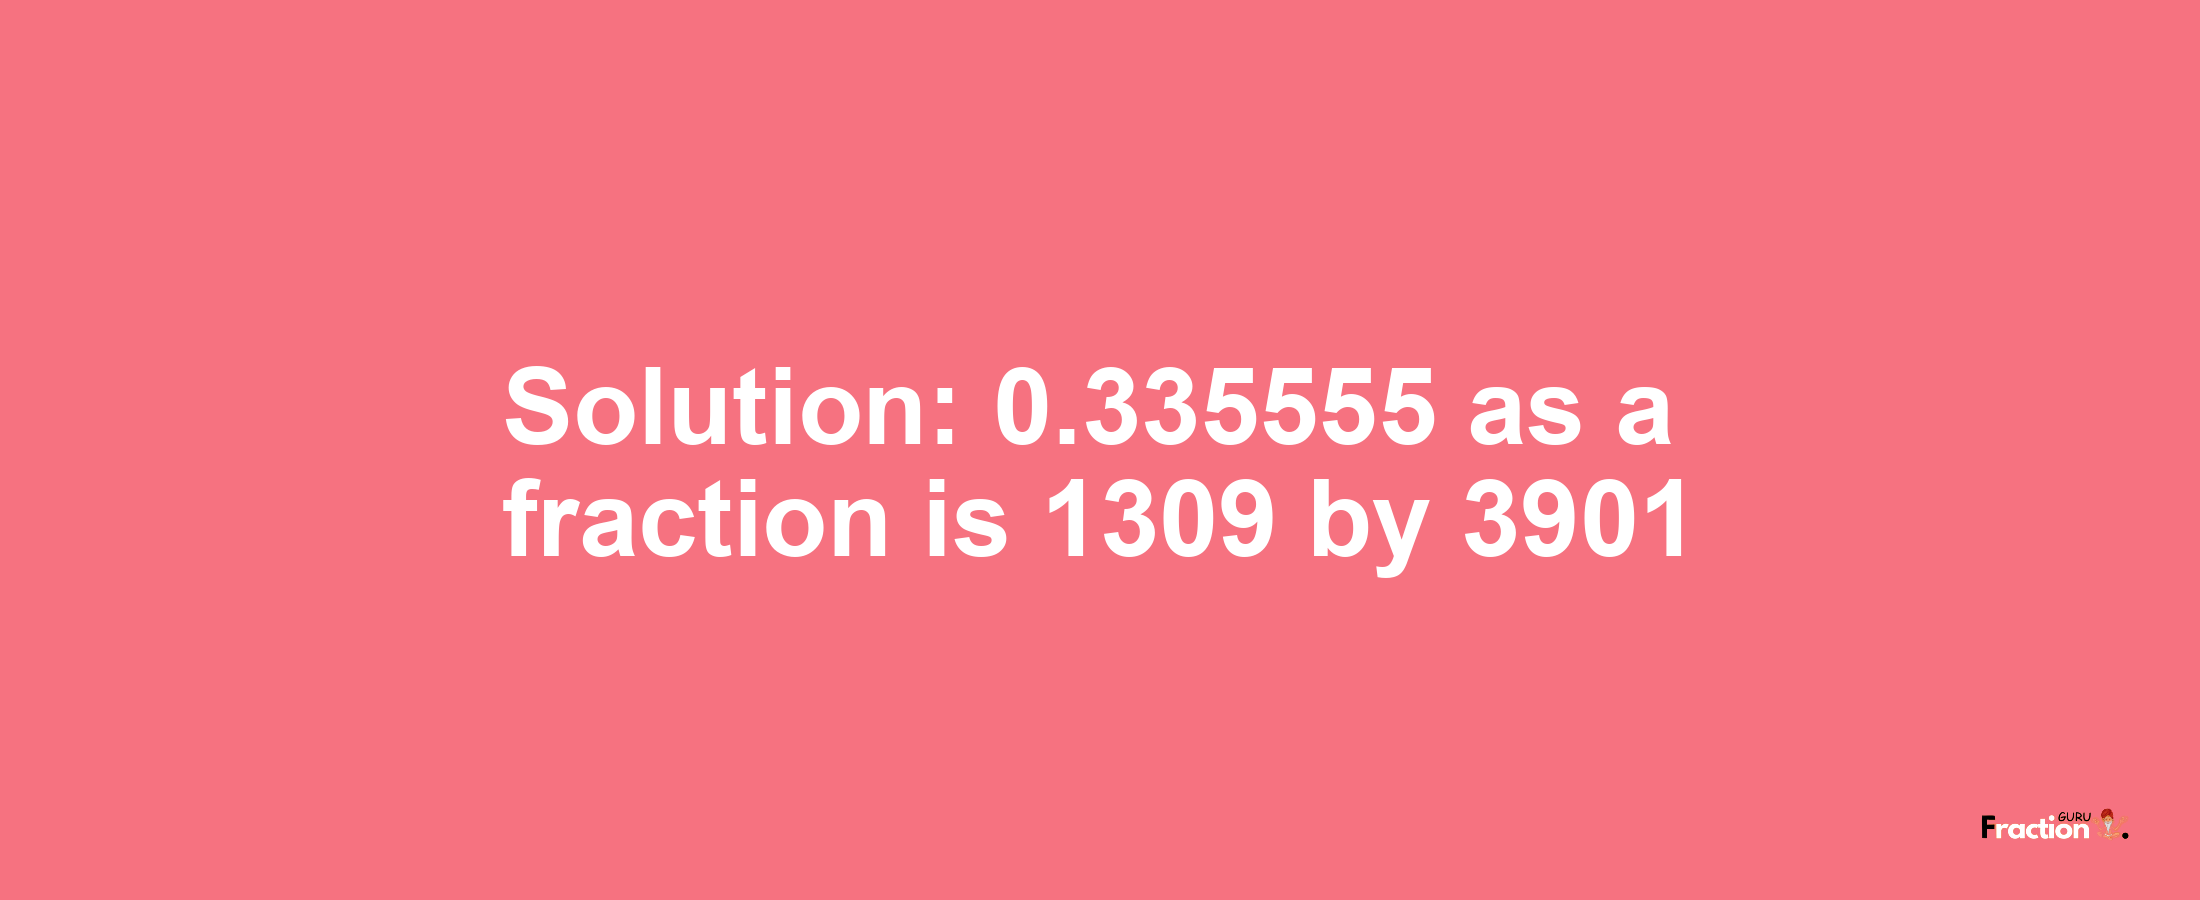 Solution:0.335555 as a fraction is 1309/3901